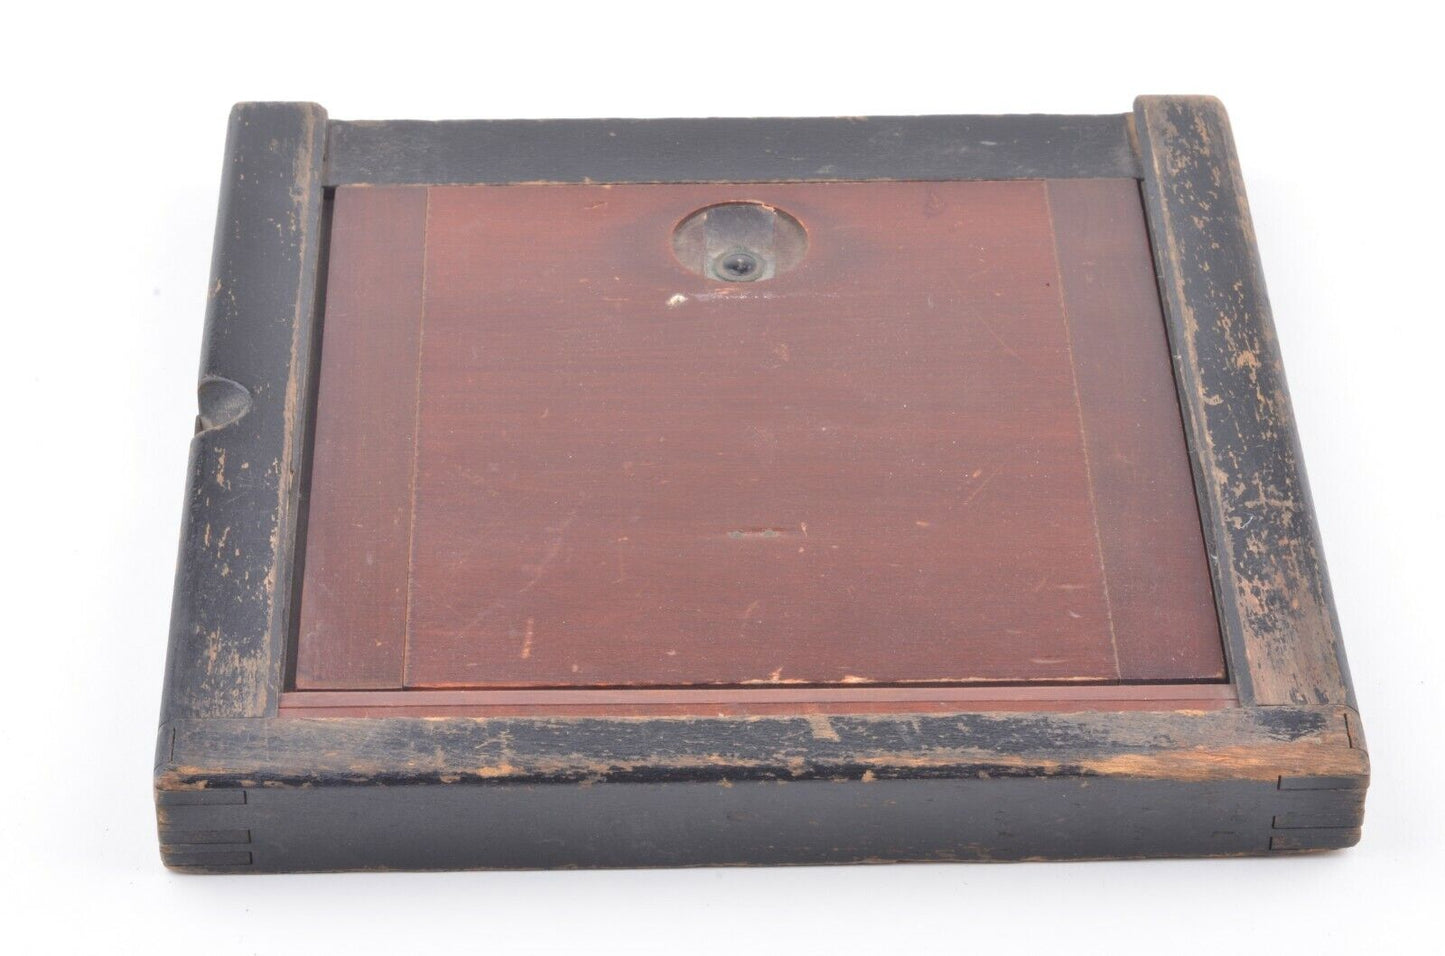 ANTIQUE REDUCING BACK 9.5x9.5" TO 7x7 or 5x6.5 or 3.25x5.5" SIZES, GREAT DESIGN